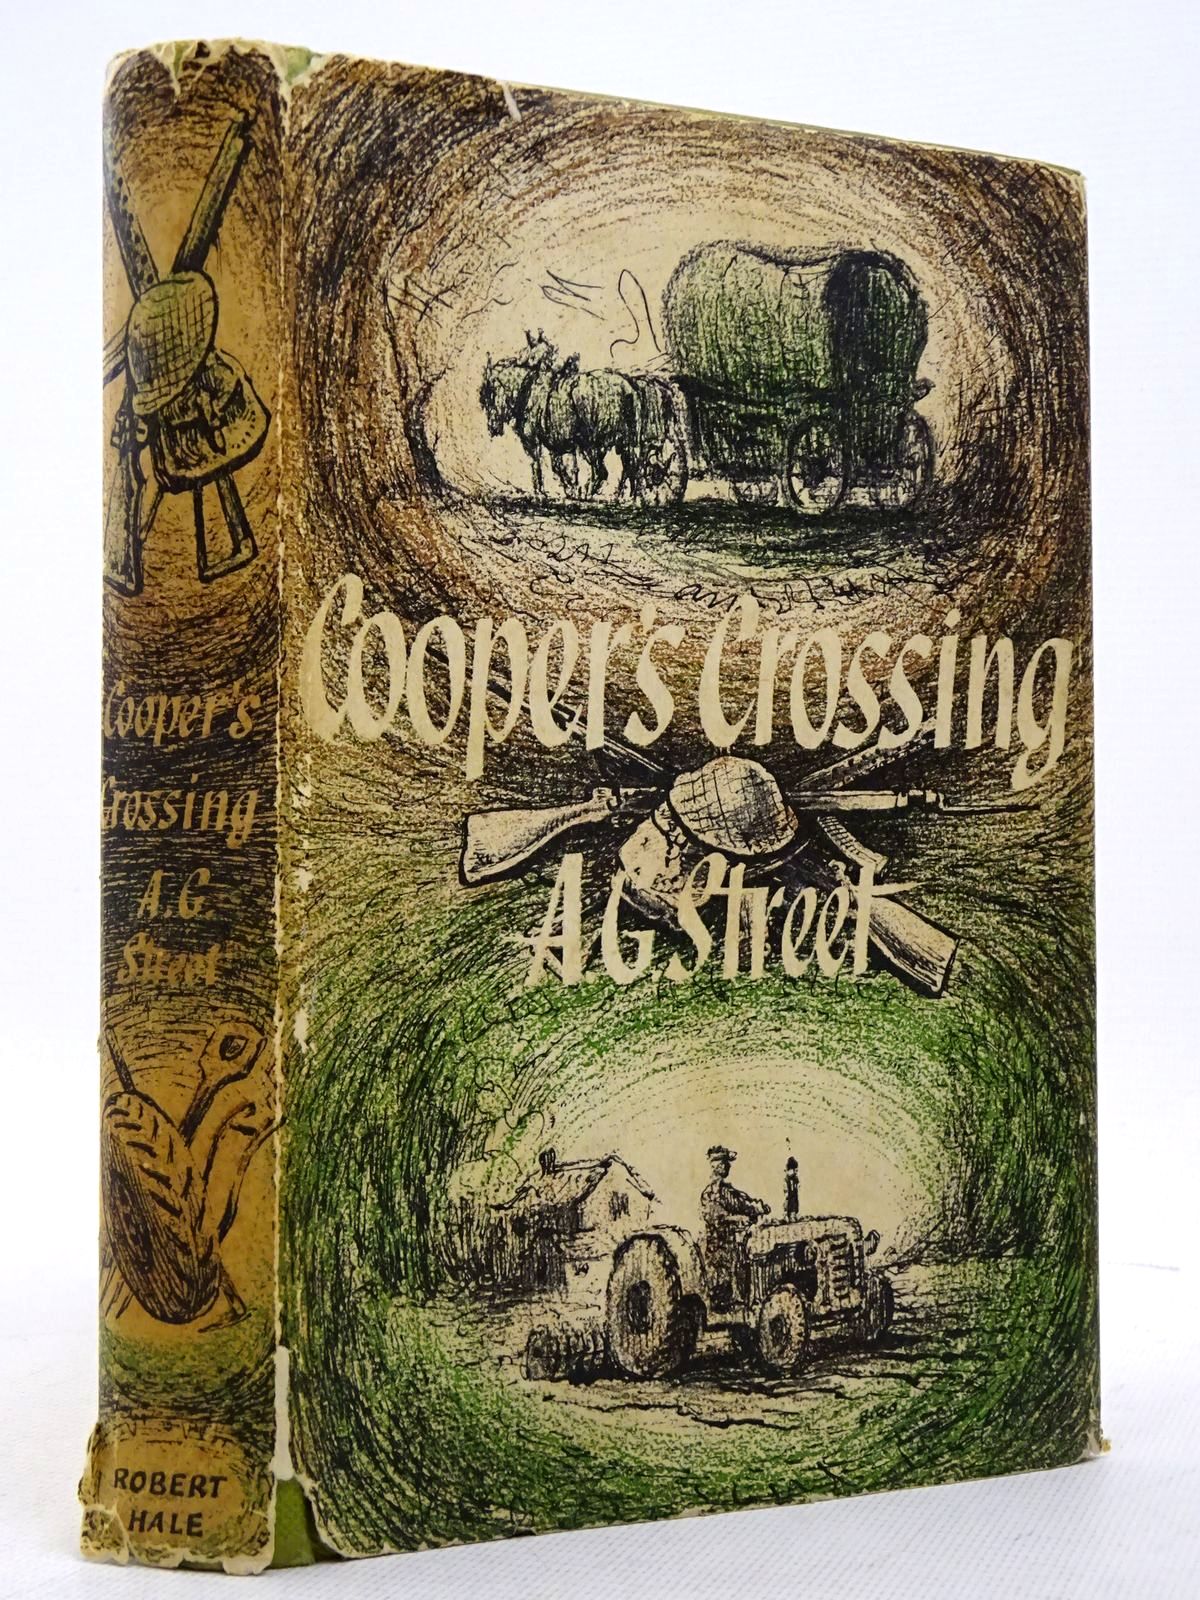 STREET, A.G. - Cooper's Crossing